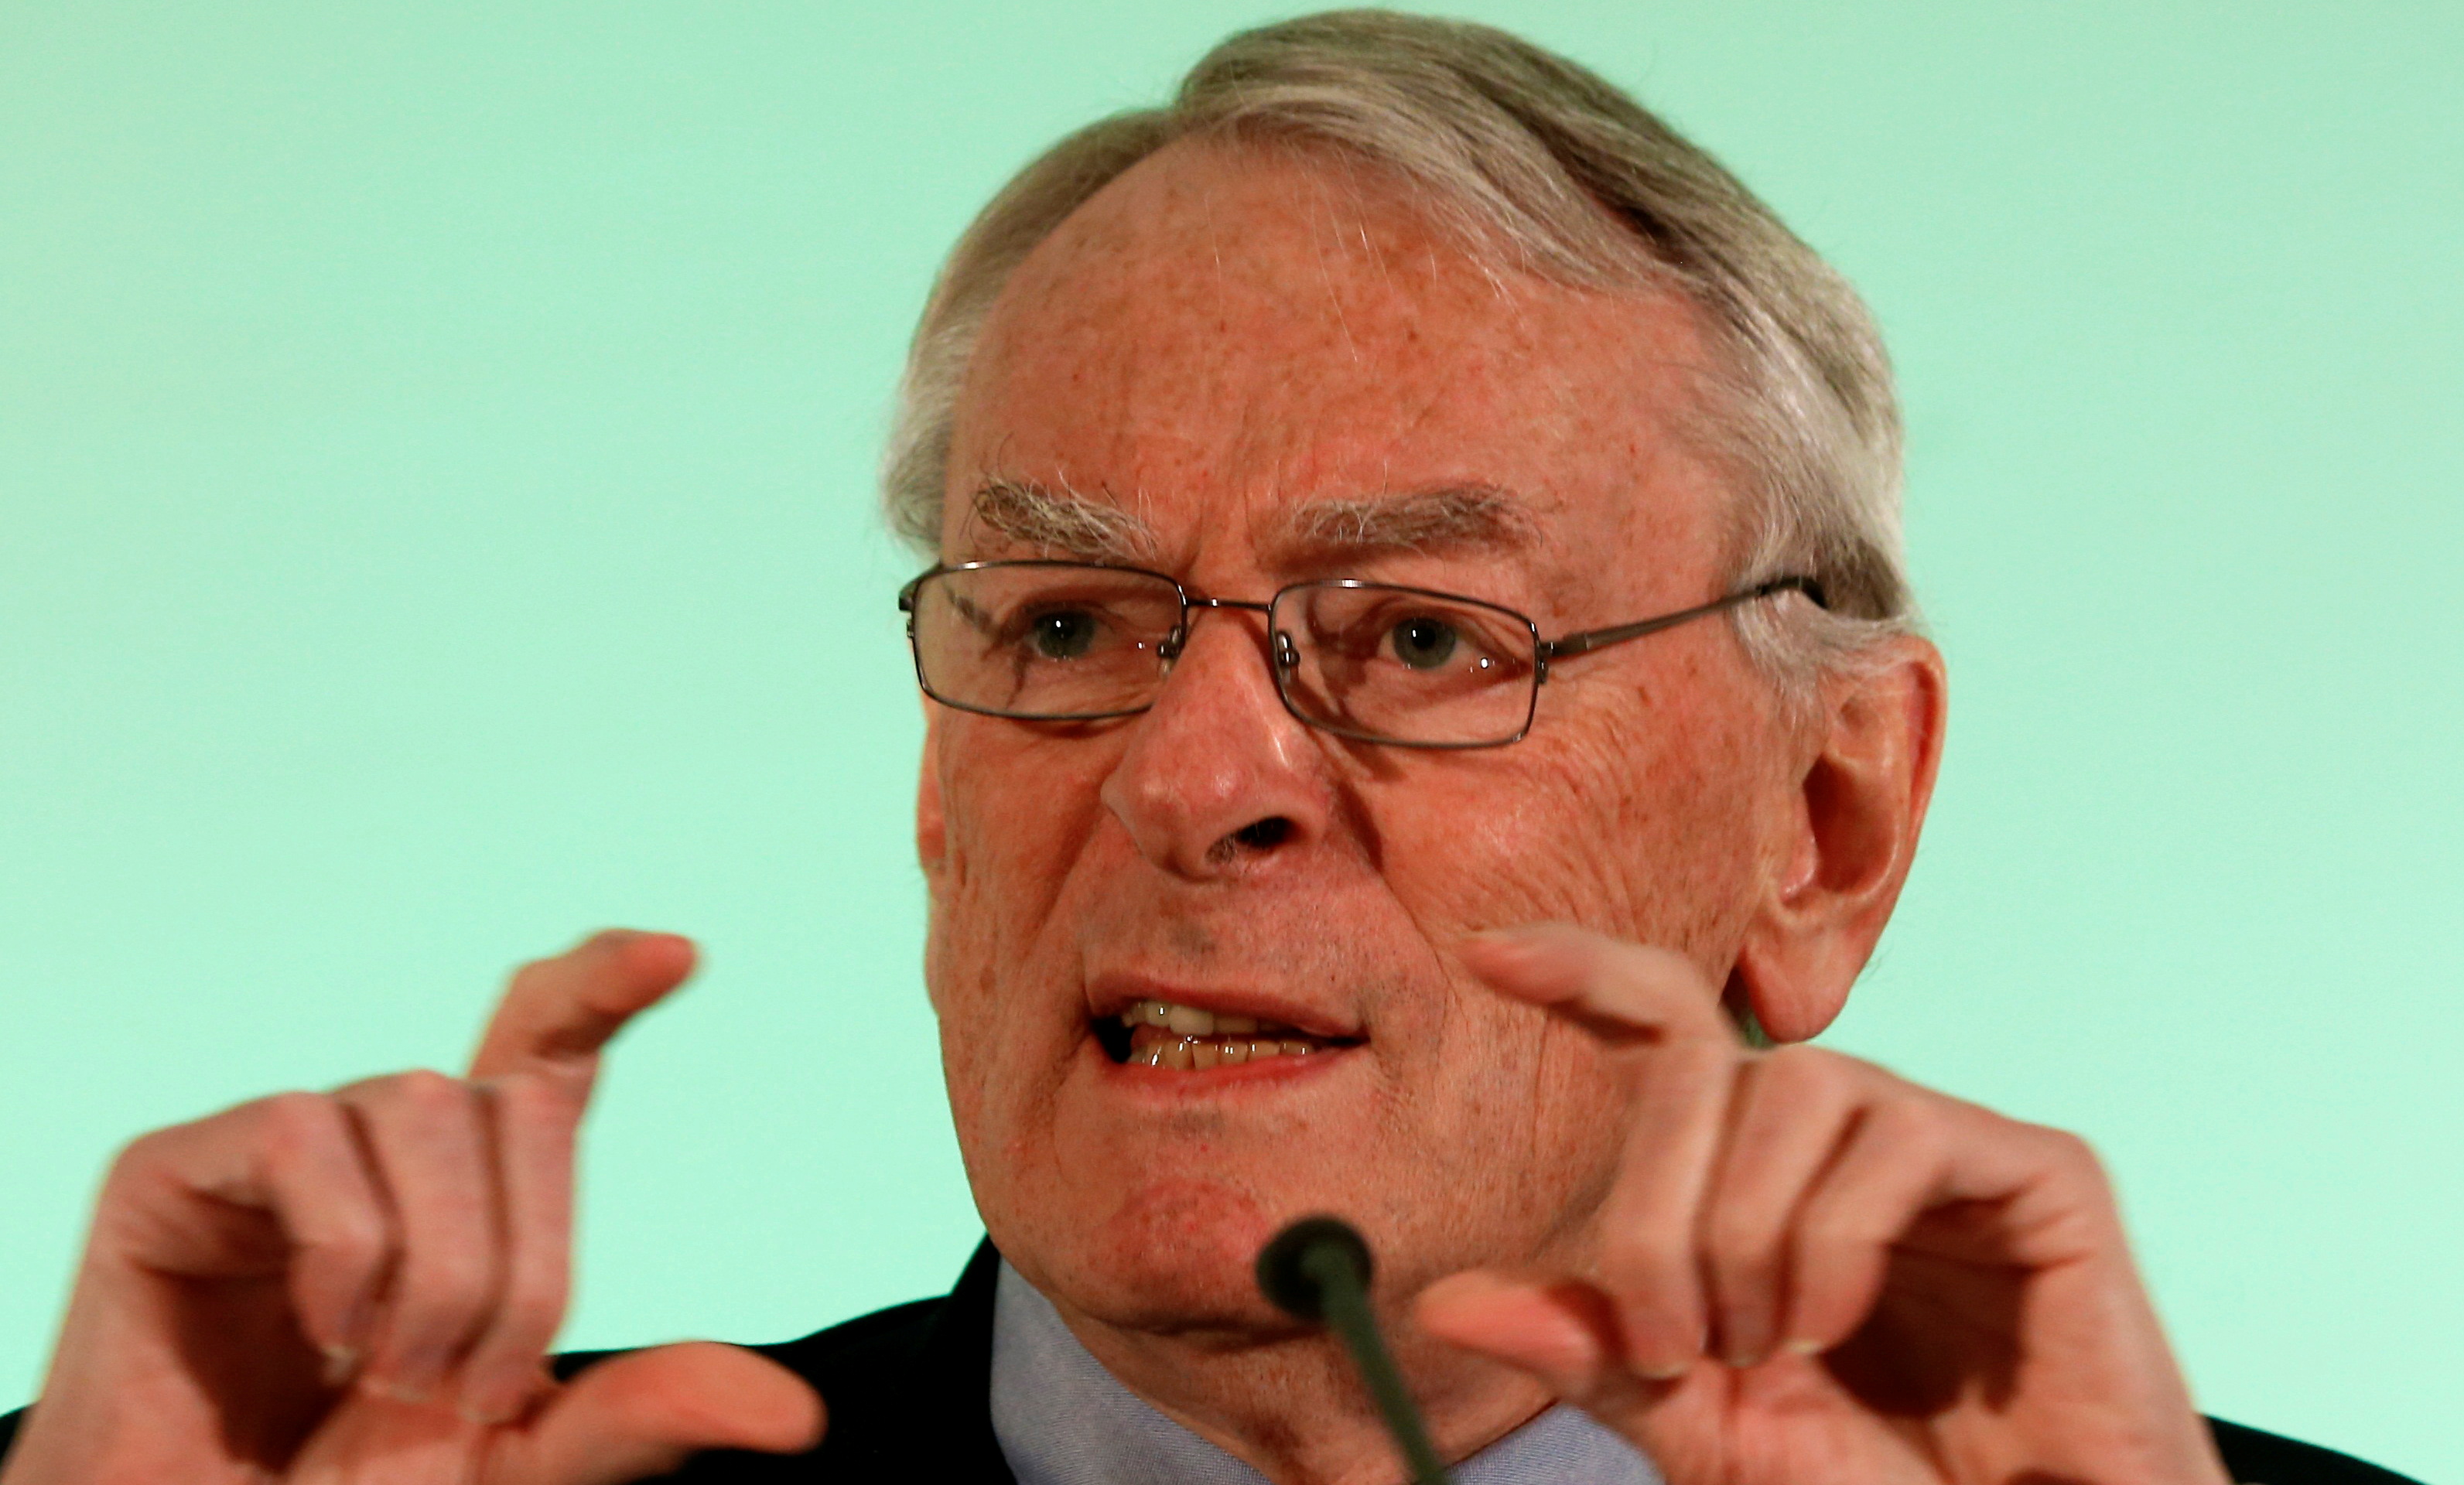 WADA former president, Pound, who heads the commission into corruption and doping in athletics, gestures at a news conference in Unterschleissheim